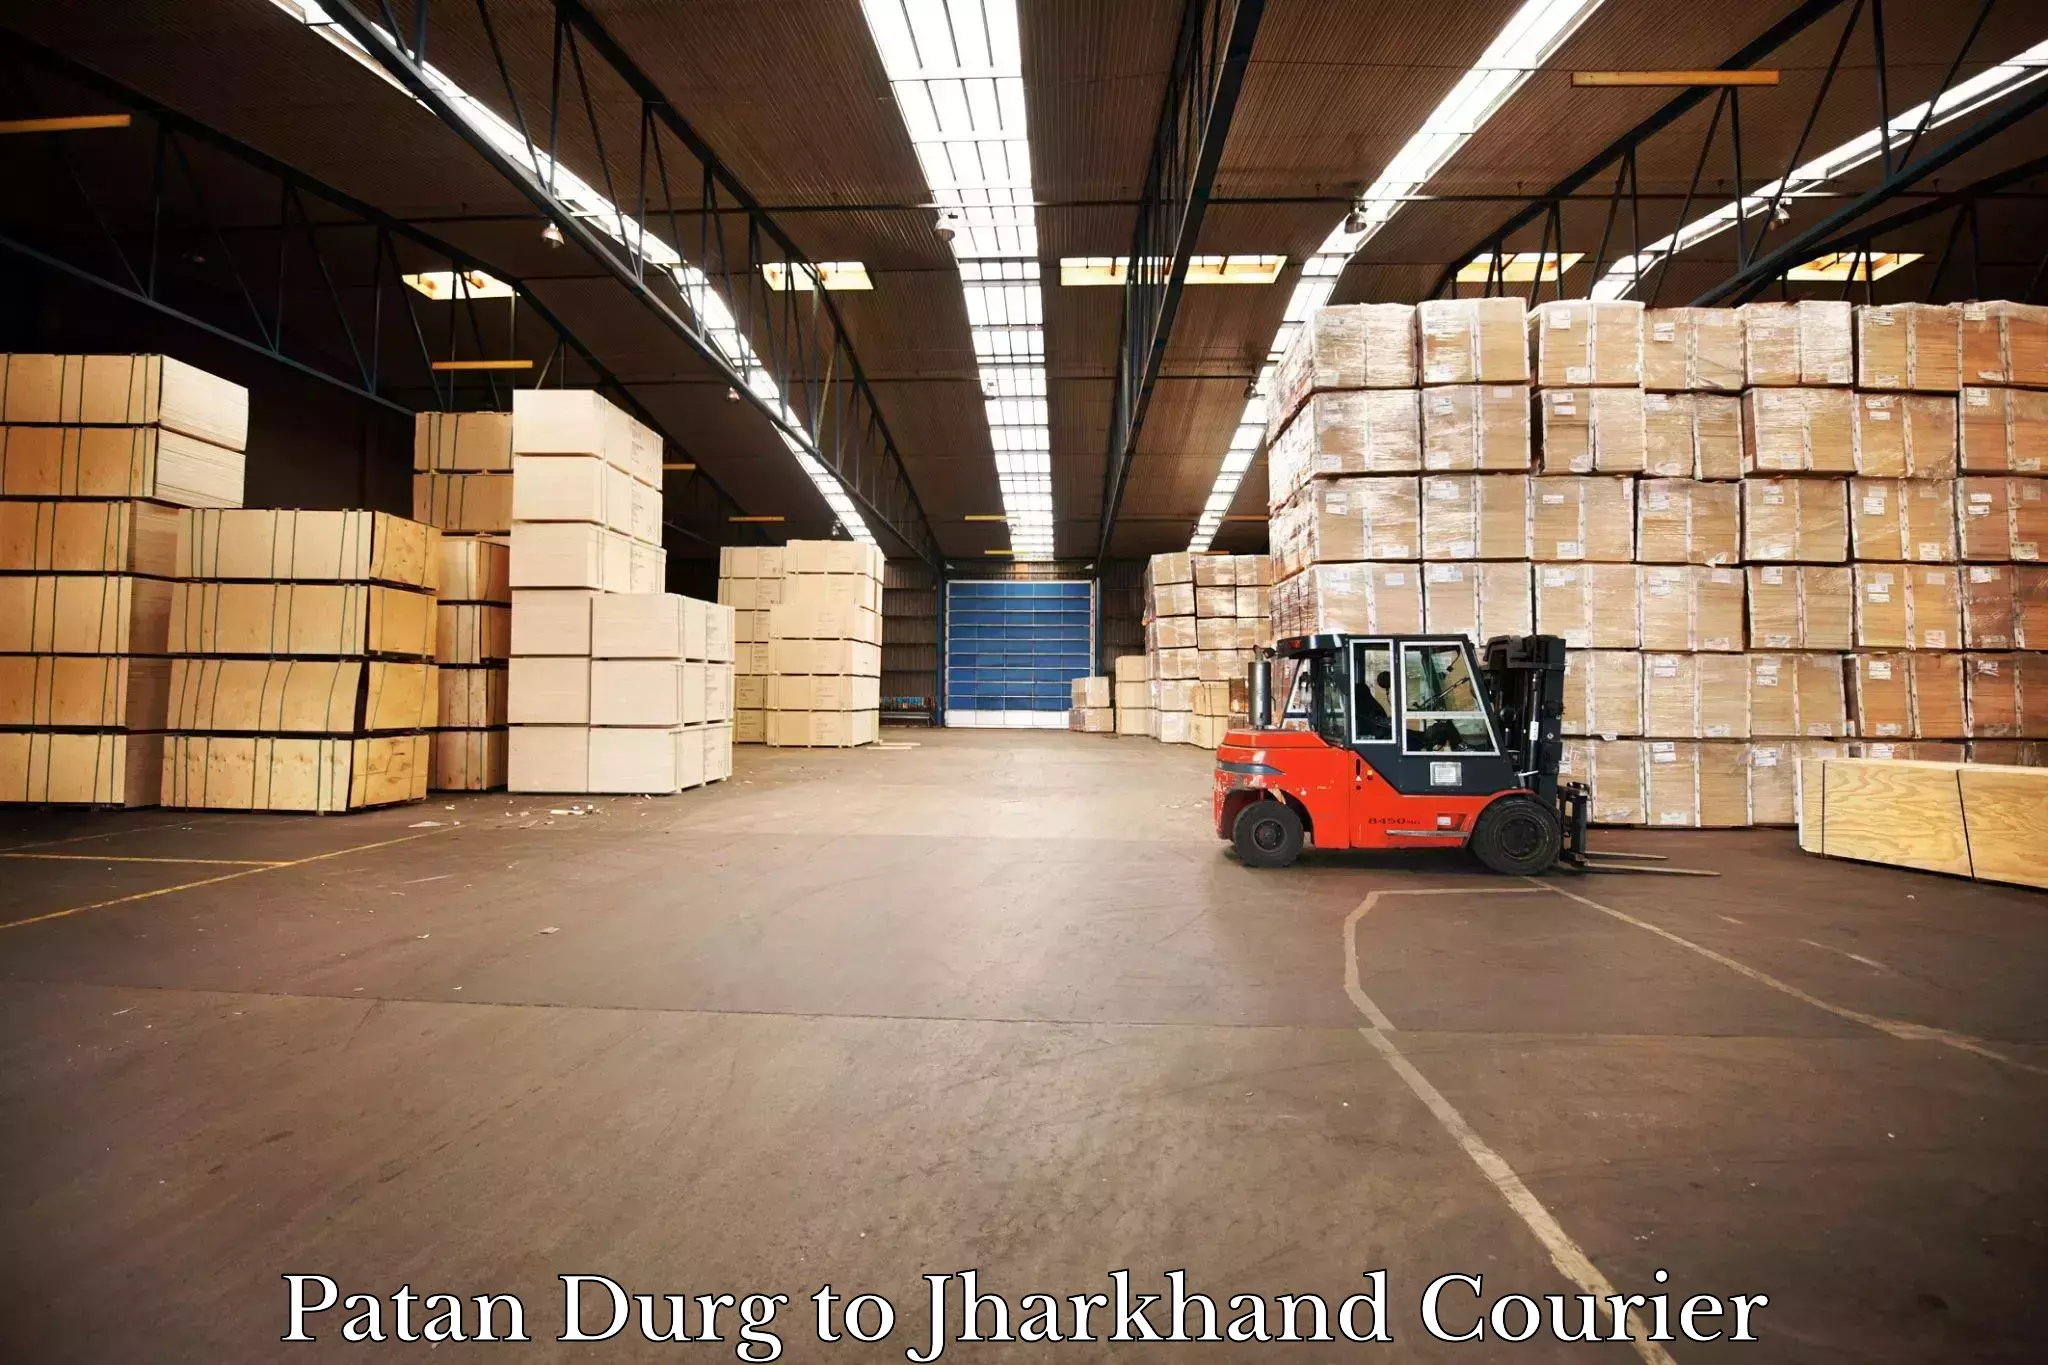 Ocean freight courier Patan Durg to Mahagama